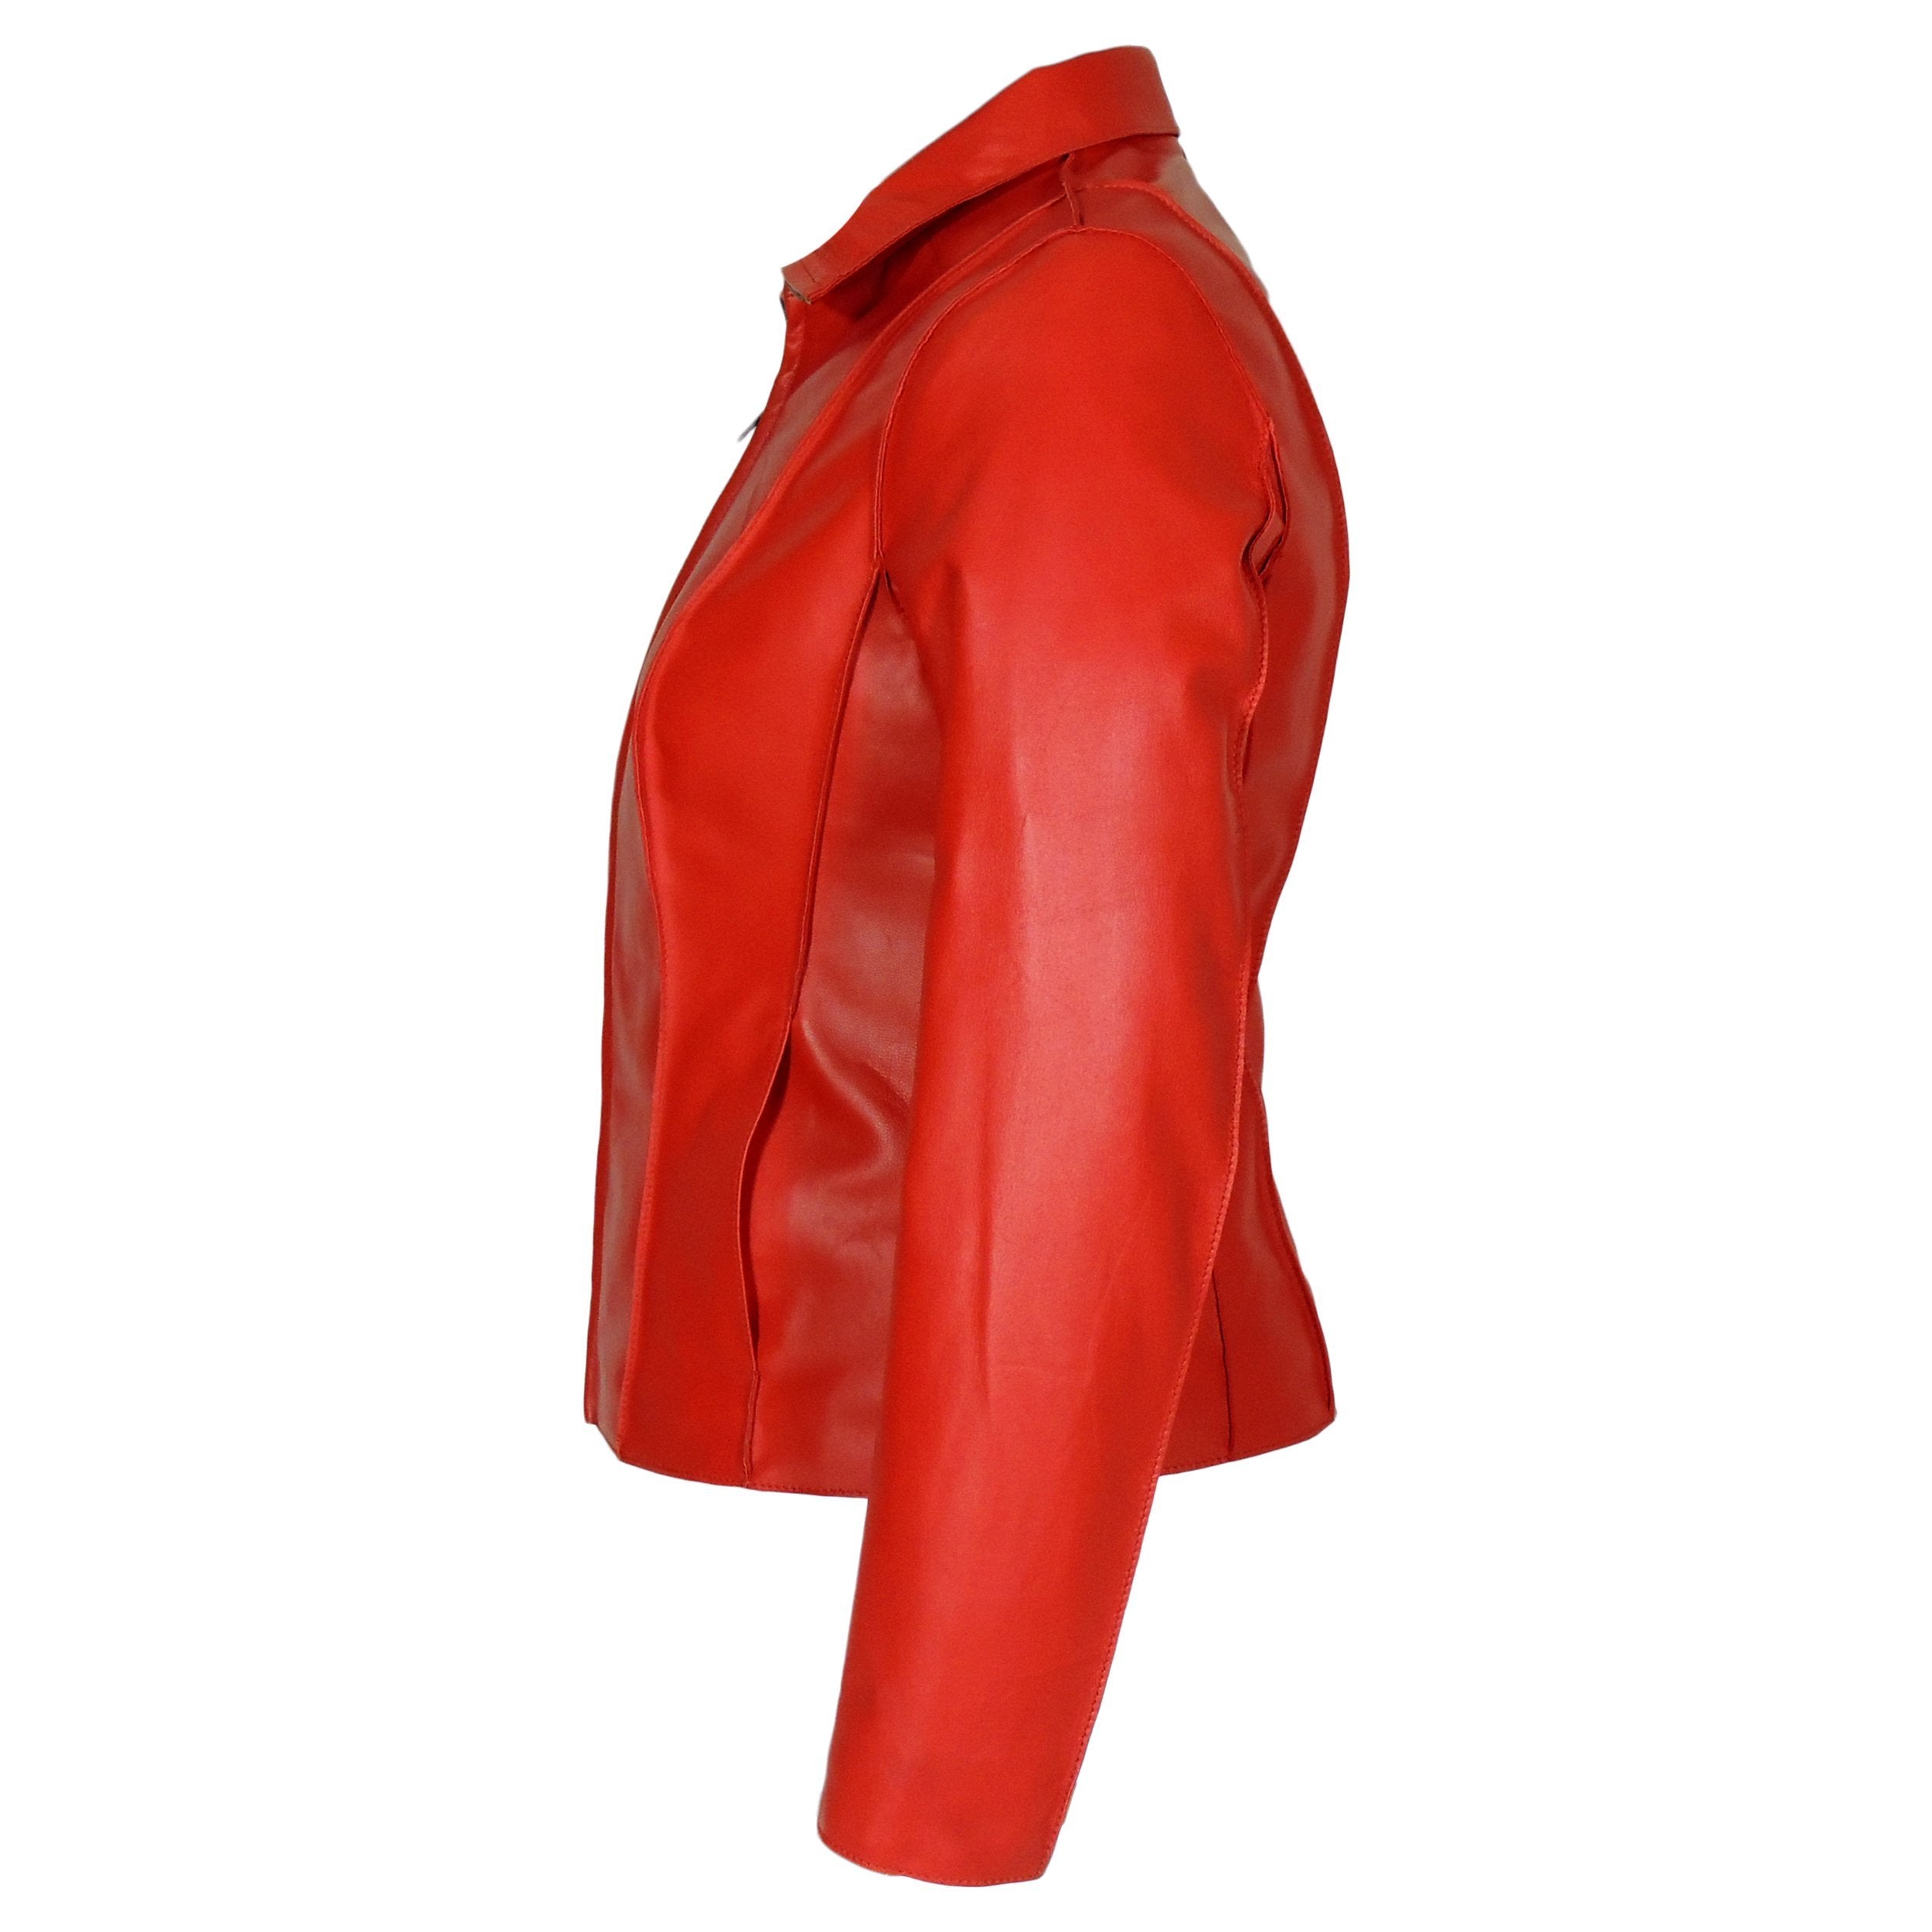 Picture of a Women's Professional Stunner Sheepskin Leather Jacket side view red